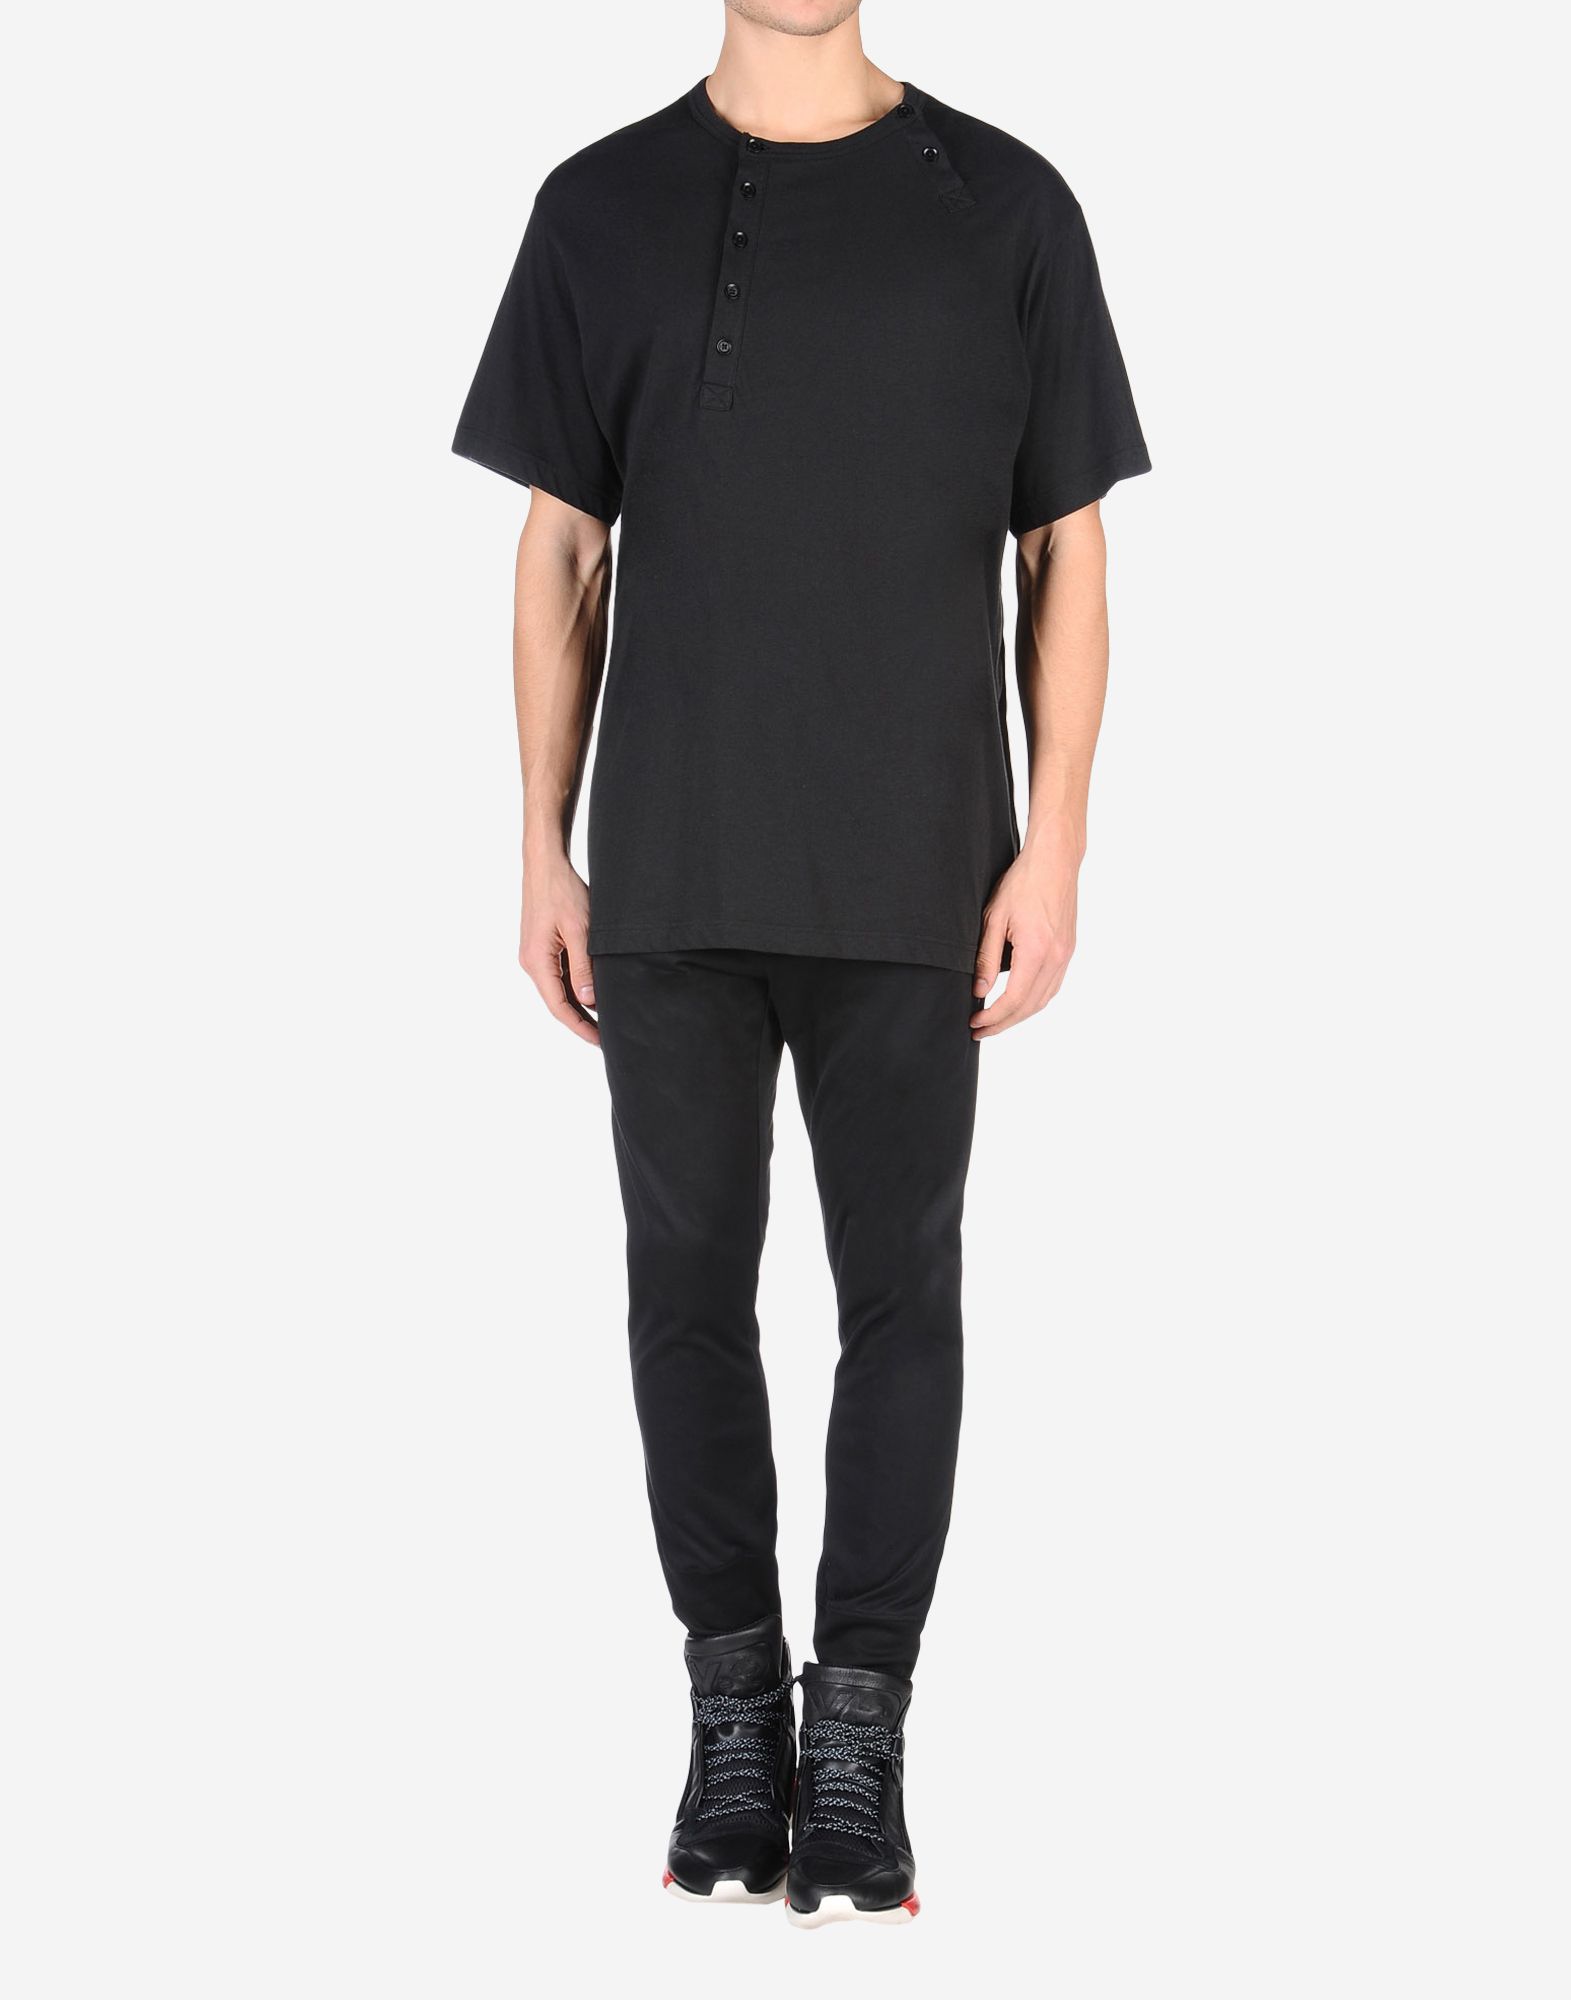 Y 3 Button Tee for Men | Adidas Y-3 Official Store